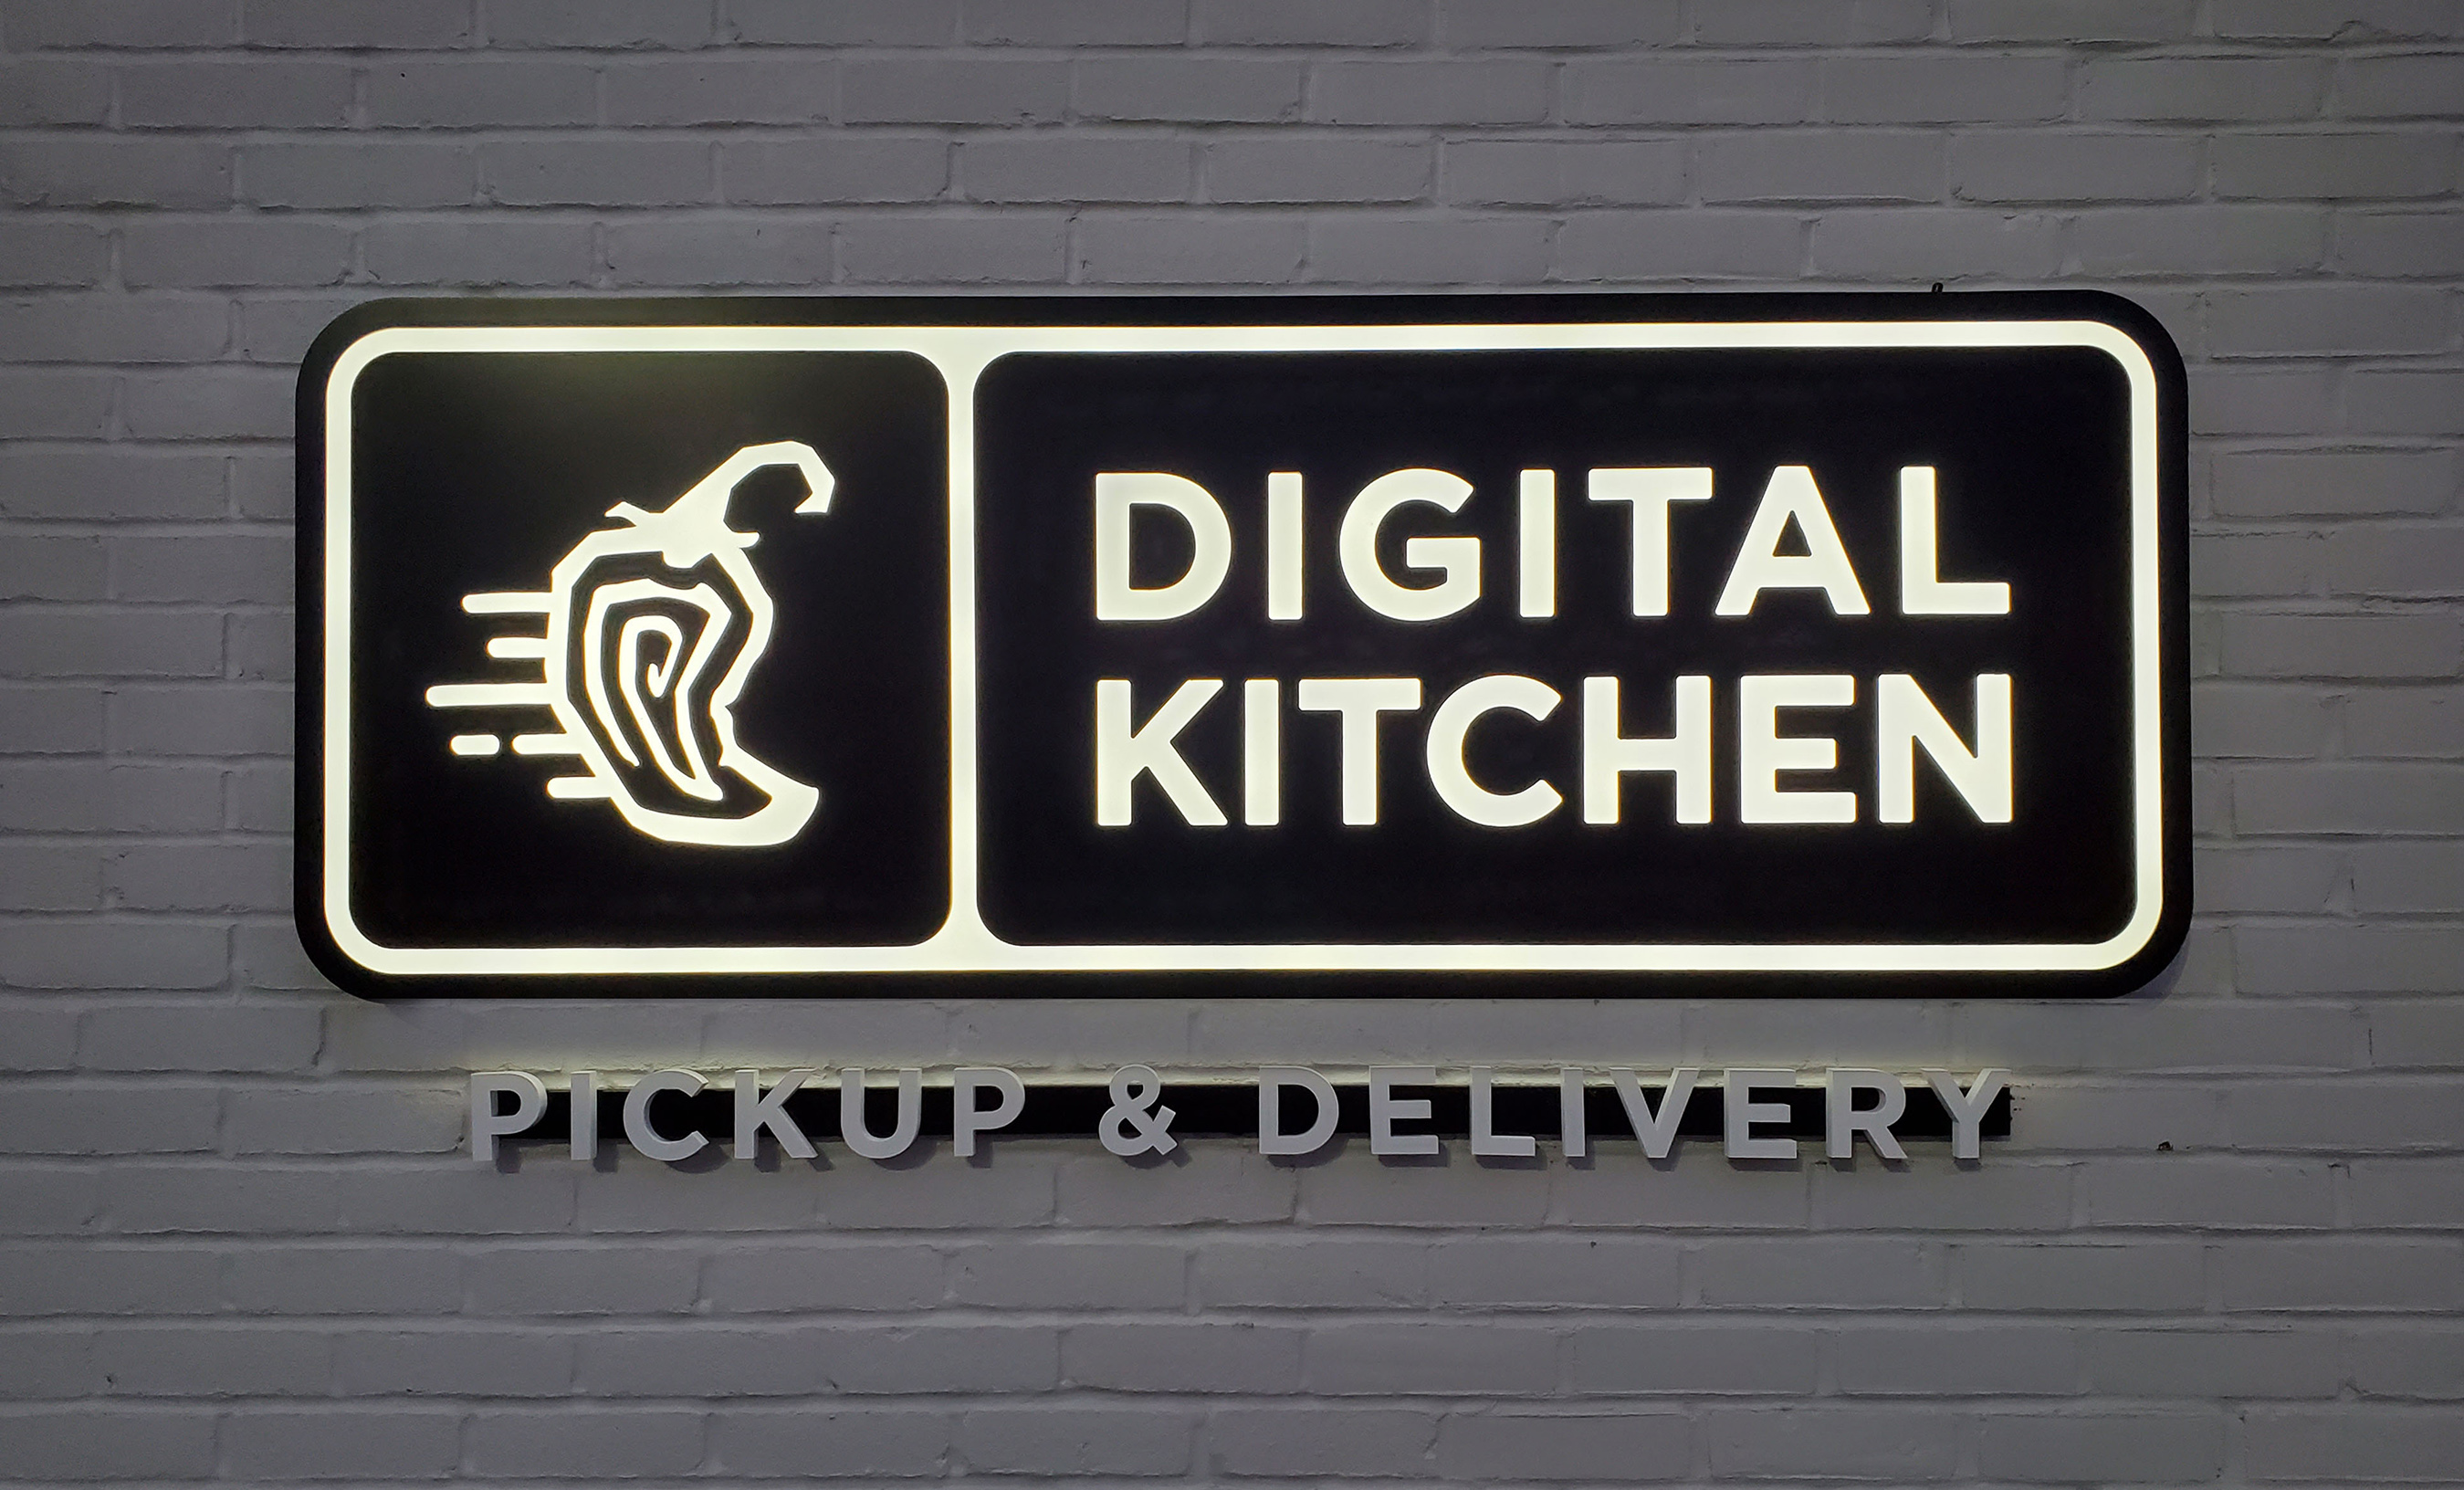 Chipotle’s second digital-only restaurant prototype serves guests who order ahead on the Chipotle app and Chipotle.com, and marketplace partners.